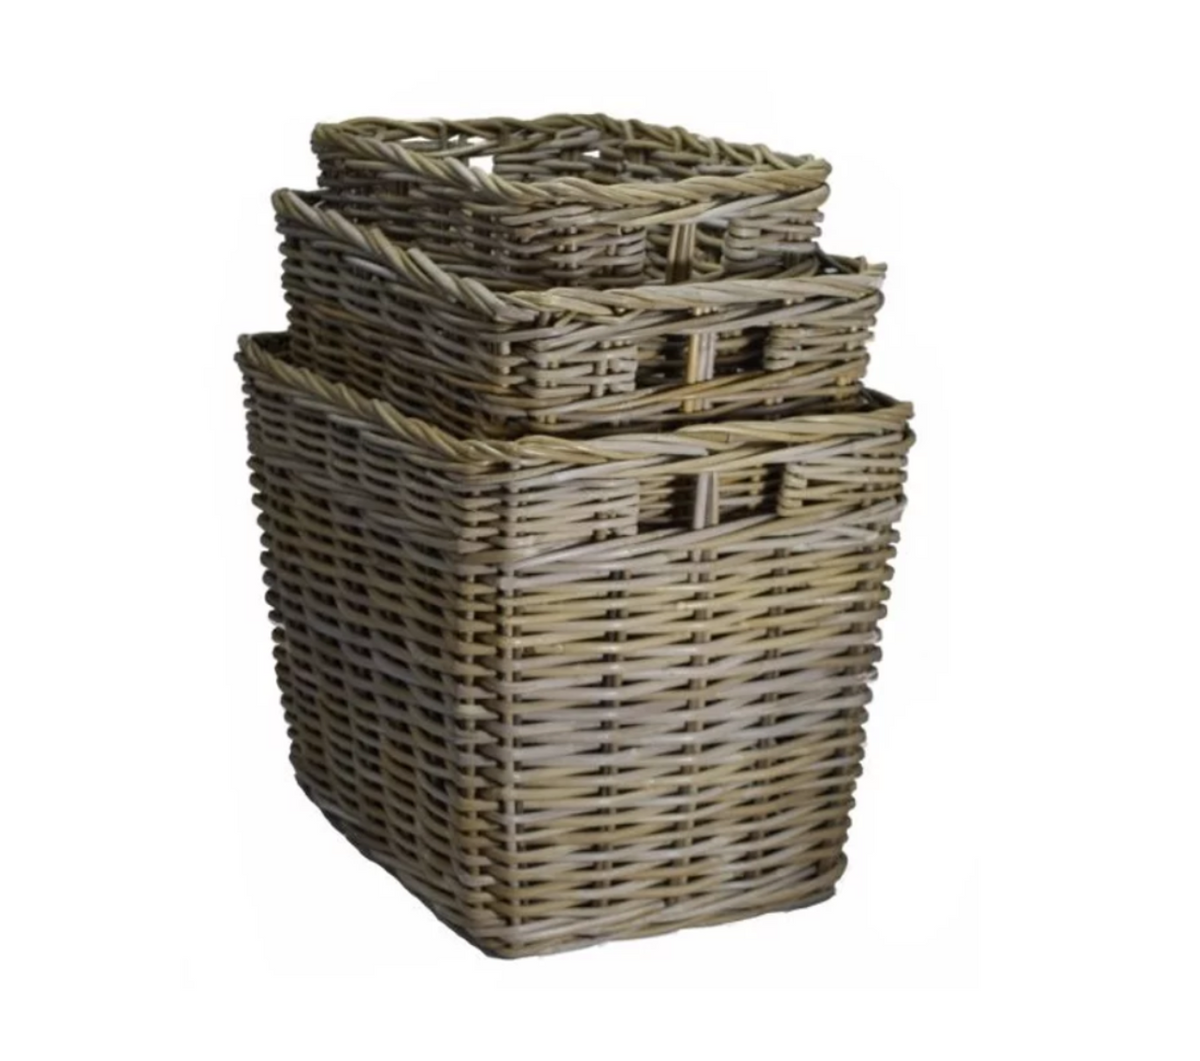 Rattan Basket - 3 Sizes - END OF LINE